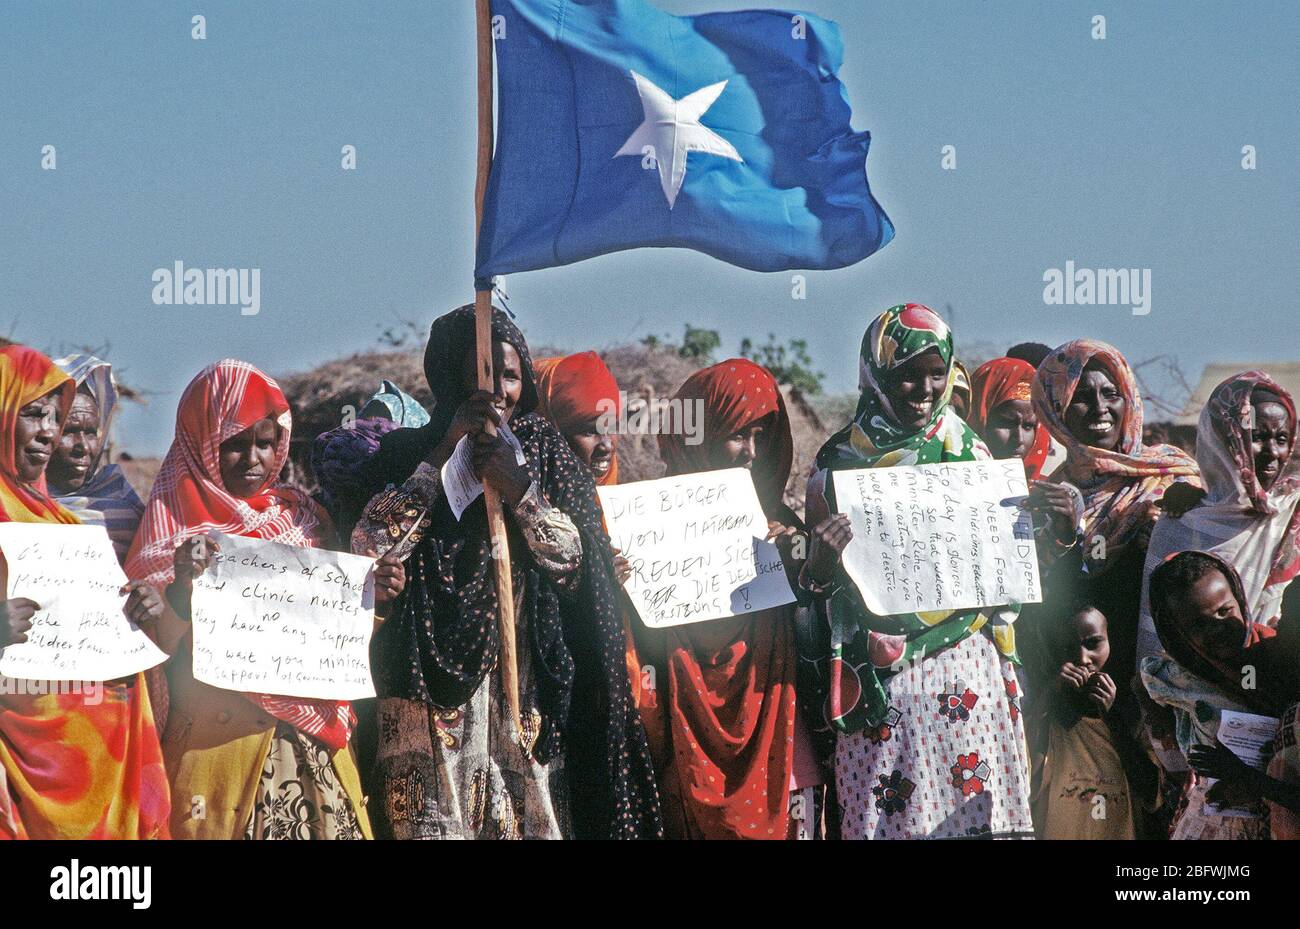 1993 - Citizens of Mataban Somalia hold signs thanking the Germans for their support during relief efforts. The Germans dug a new water well for the Somalis and the German Defense Minister dedicated the well. Stock Photo